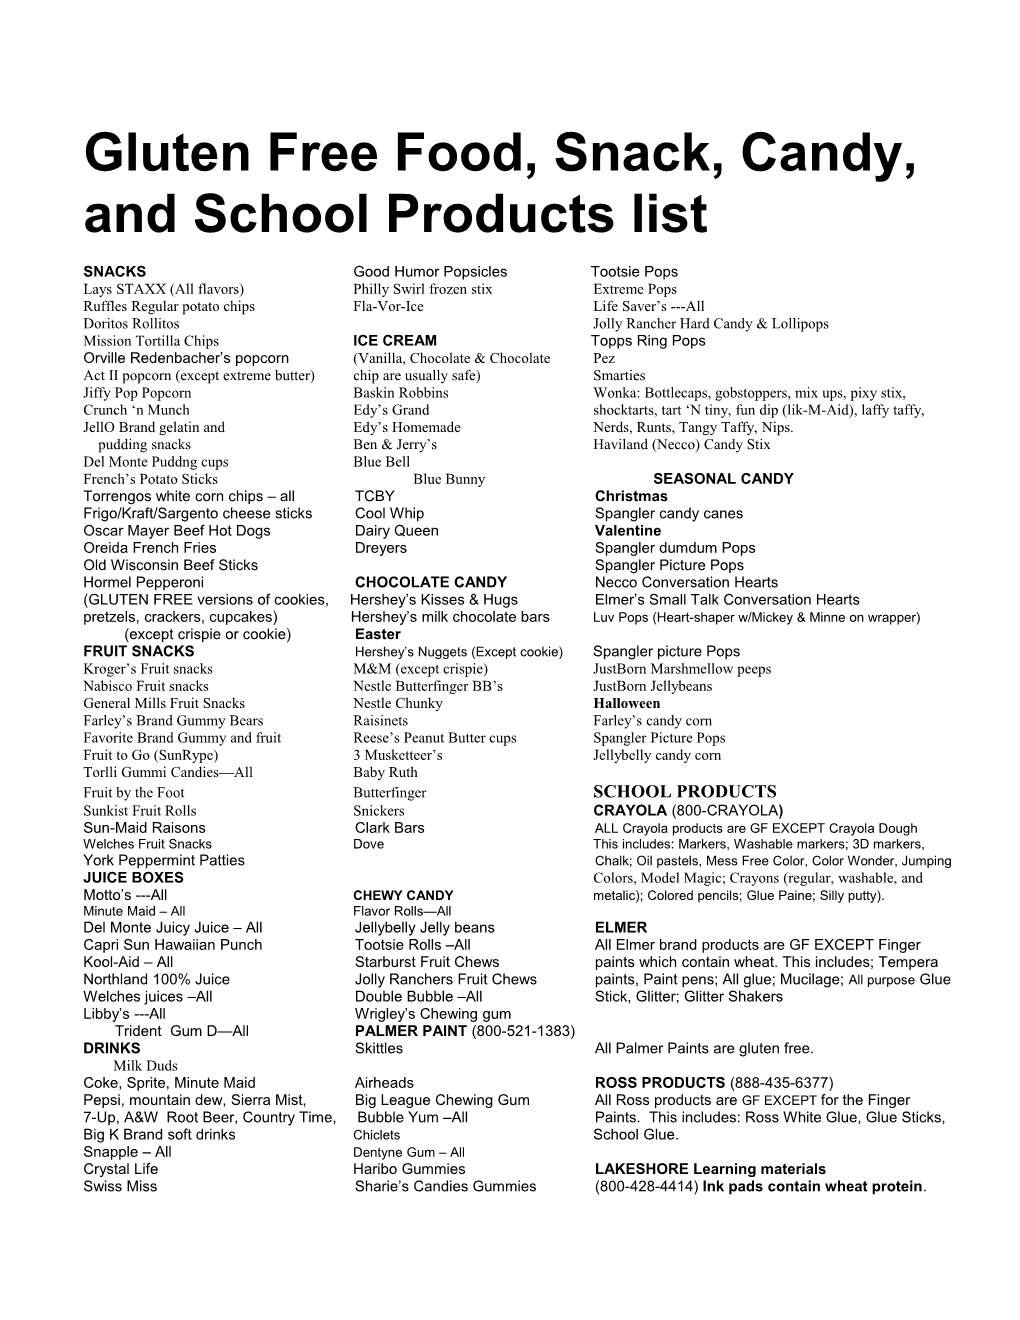 Gluten Free Food, Snack, Candy, and School Products List